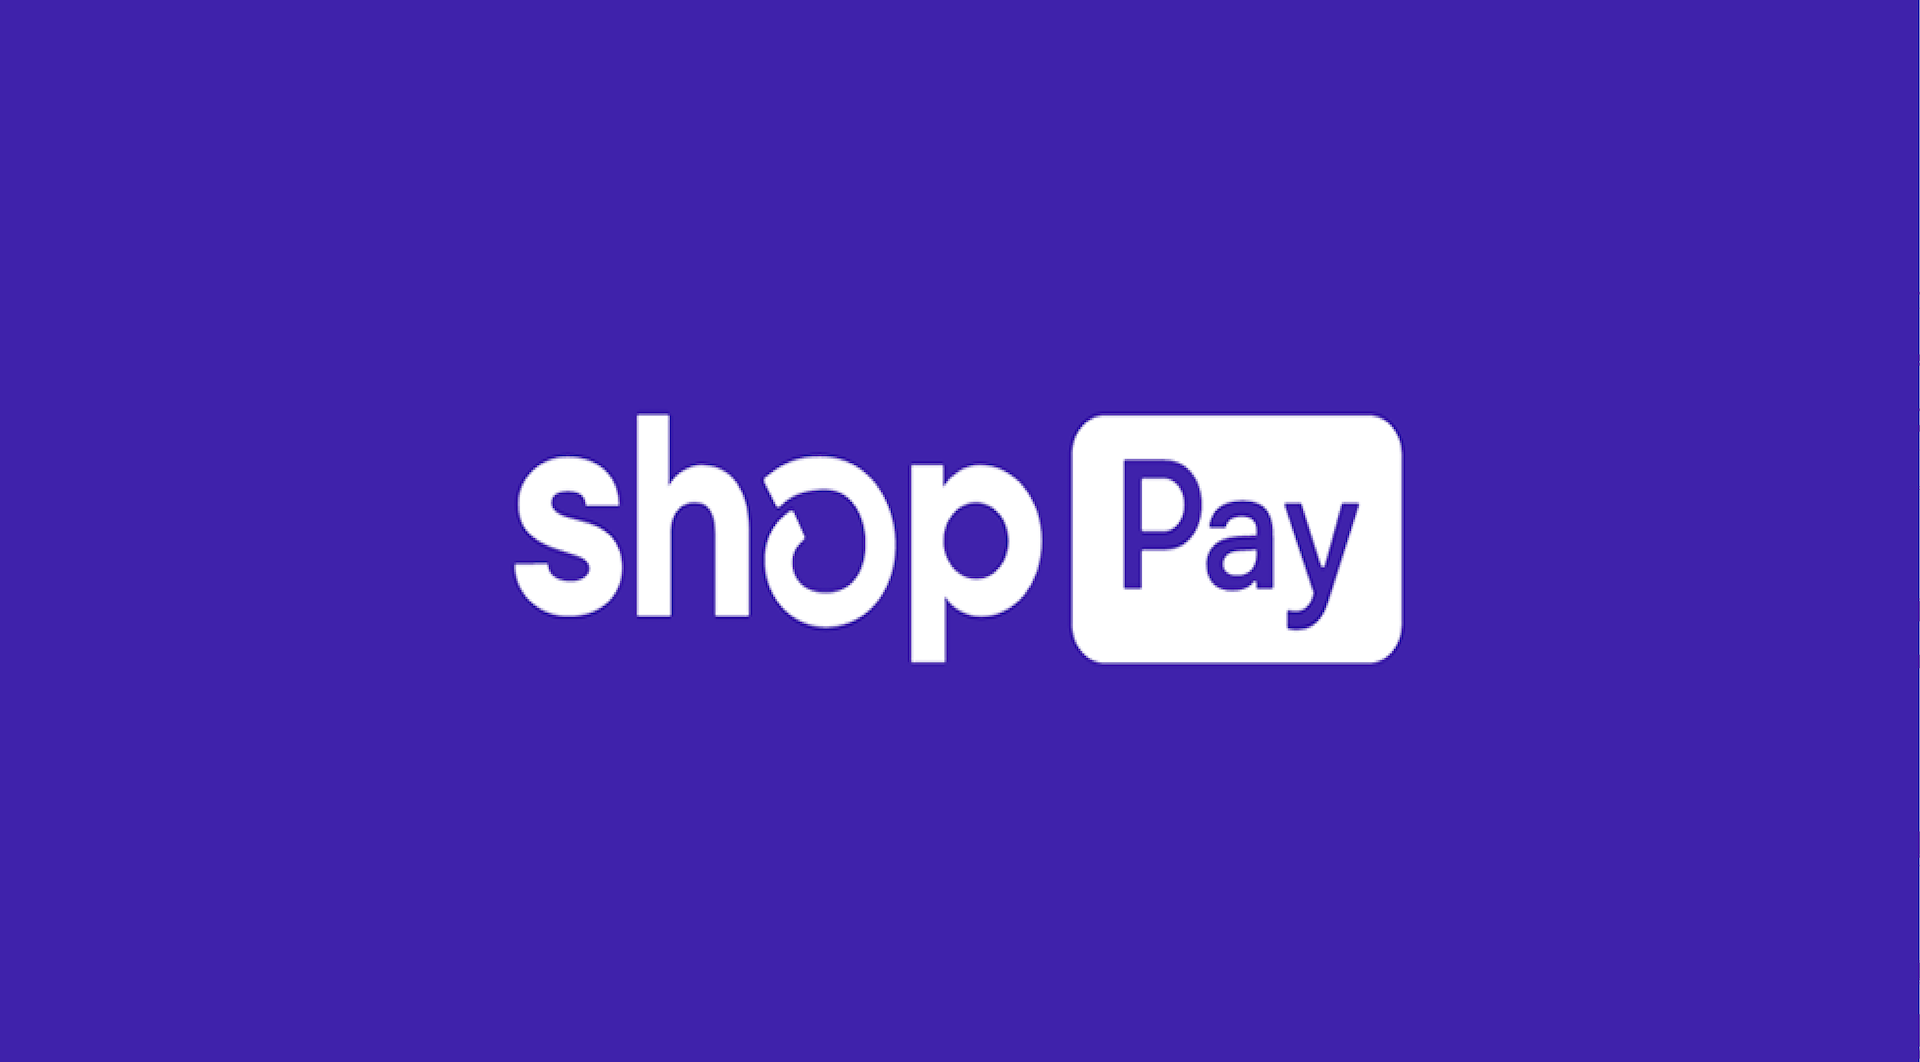 Shop pay accelerated checkout payment method allows for payment plans upon your orders